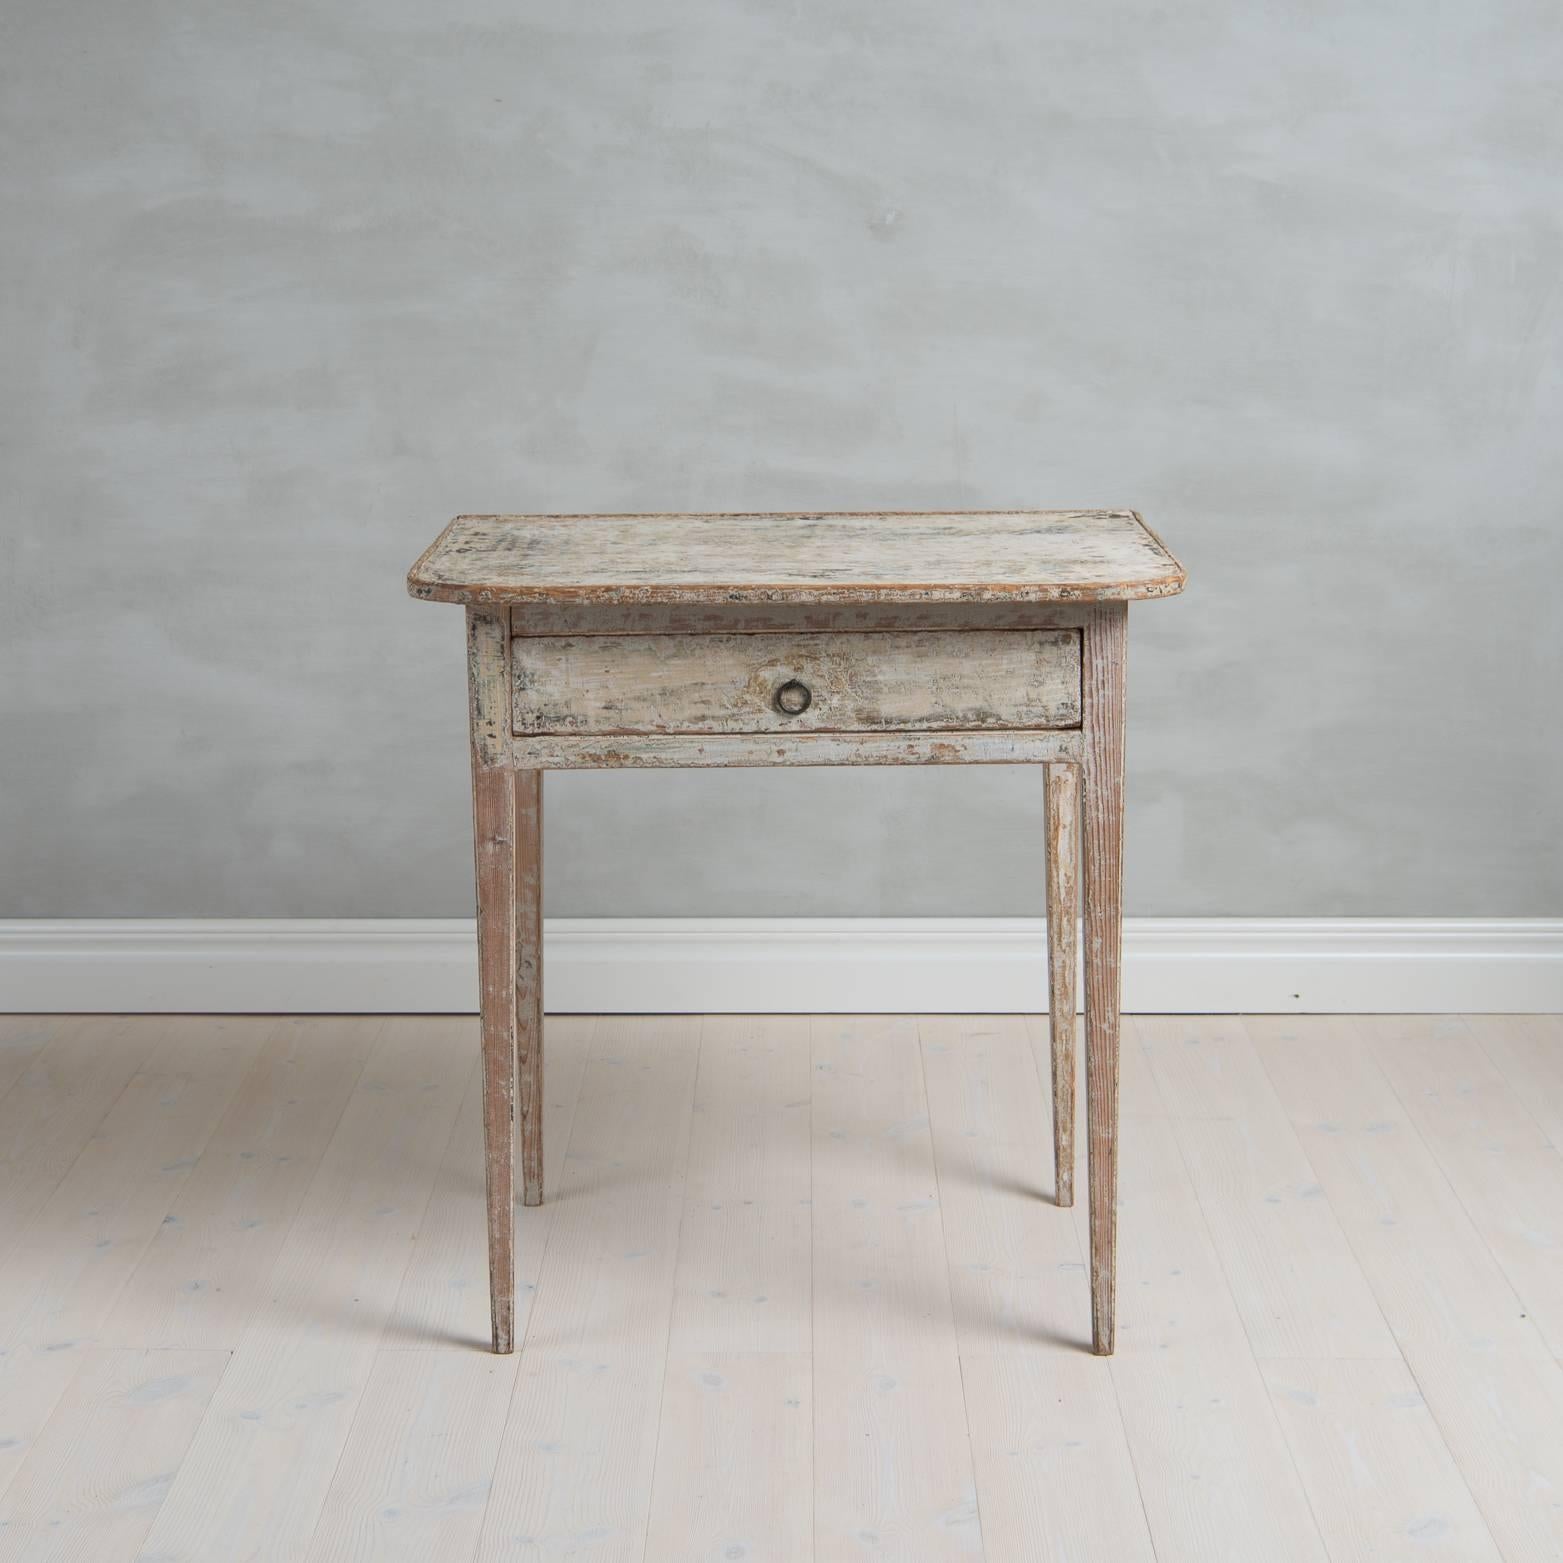 Paintied Gustavian side table with tapered legs and a drawer. The front edge of the top has rounded corners. The table is dry scraped to original paint. From Northern Sweden.